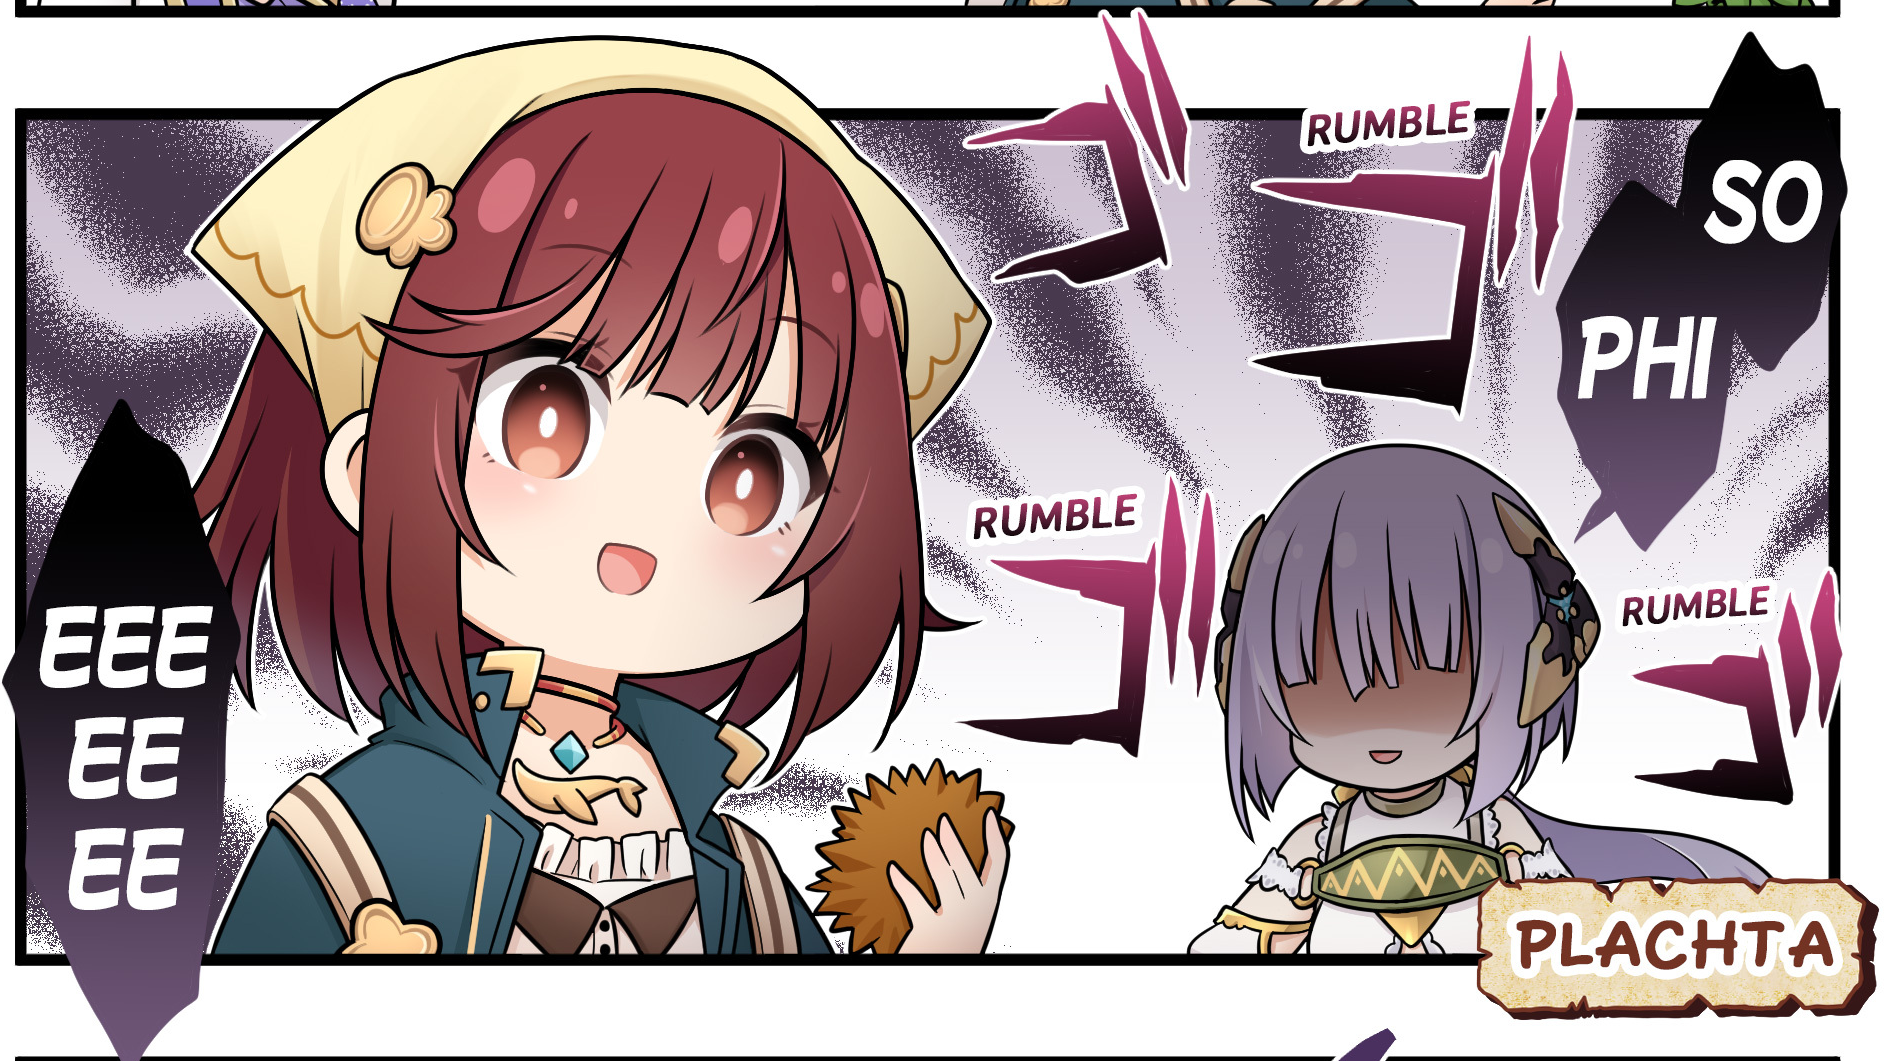 New Atelier Resleriana English Mini-Manga Features Original Characters, Sophie, and Plachta